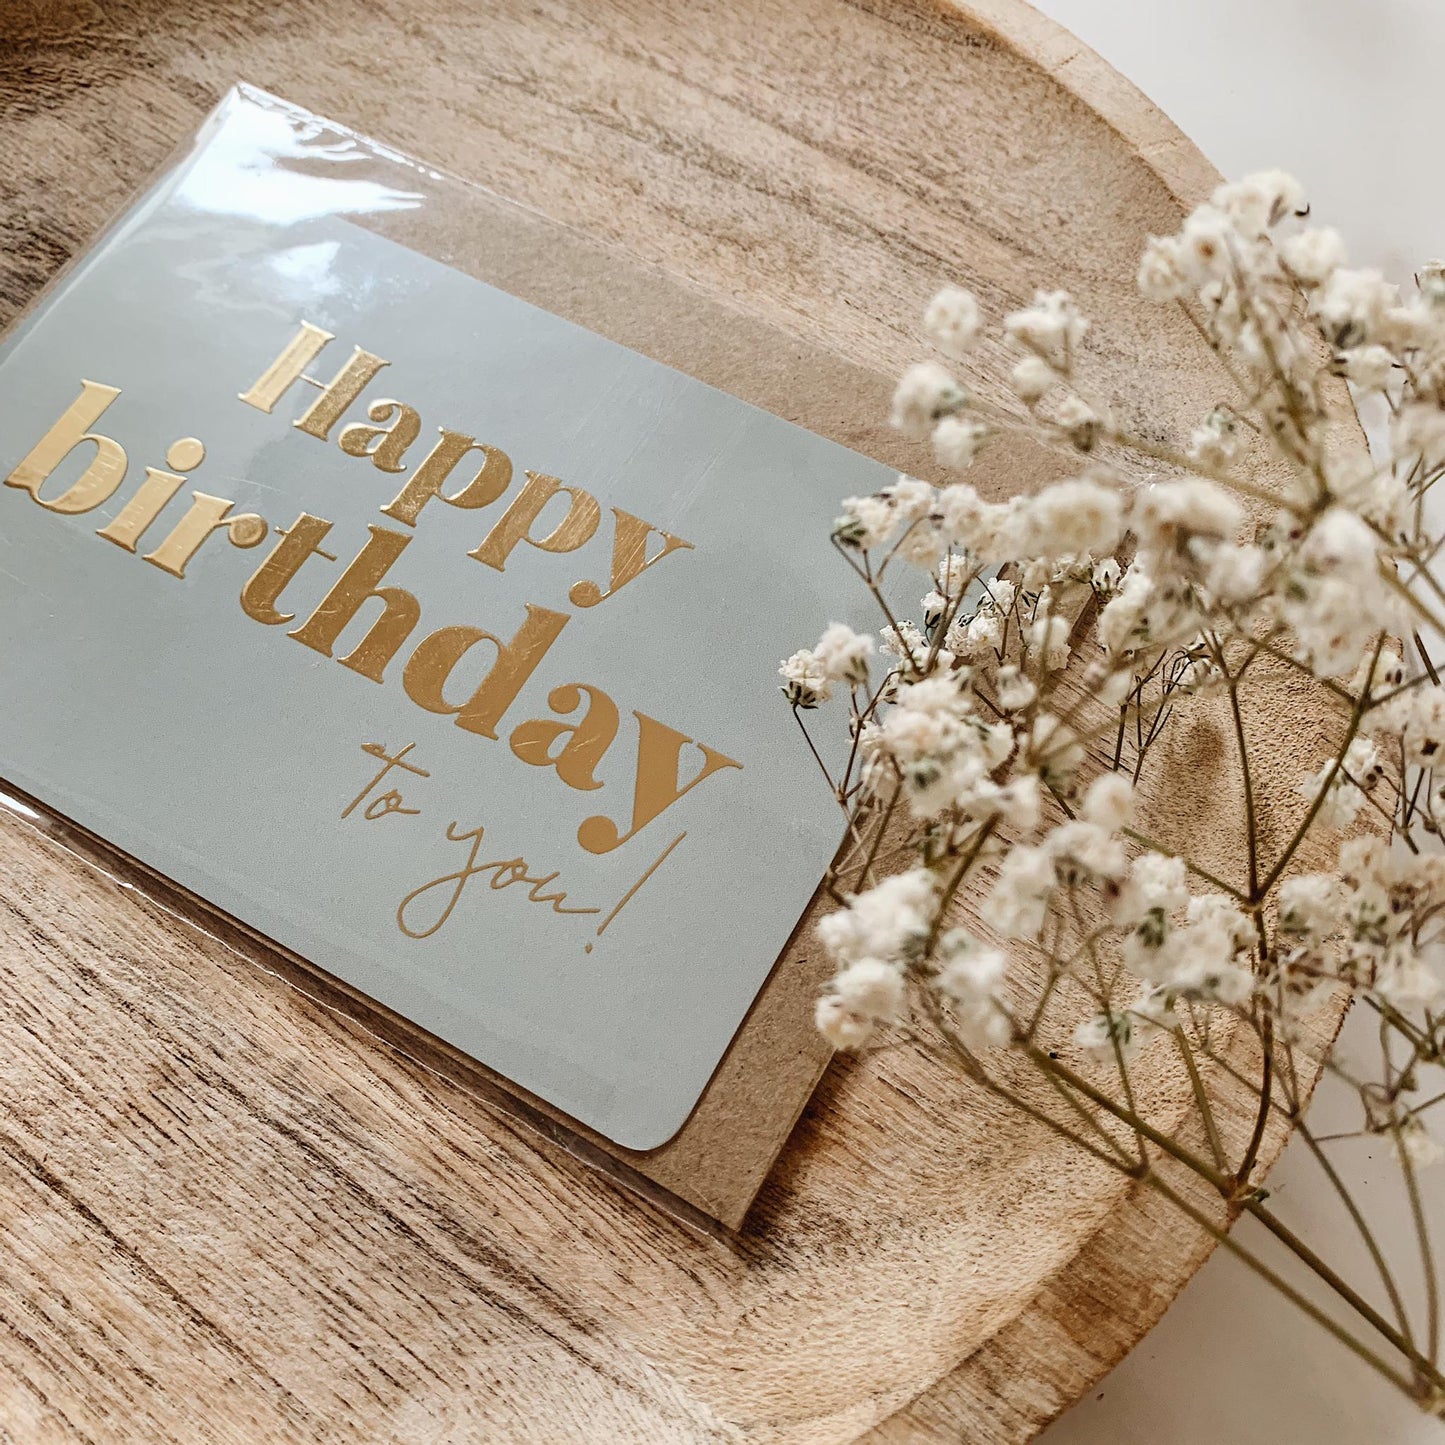 CARTE DE VOEUX "HAPPY BIRTHDAY TO YOU" GOLD - SEVEN PAPER